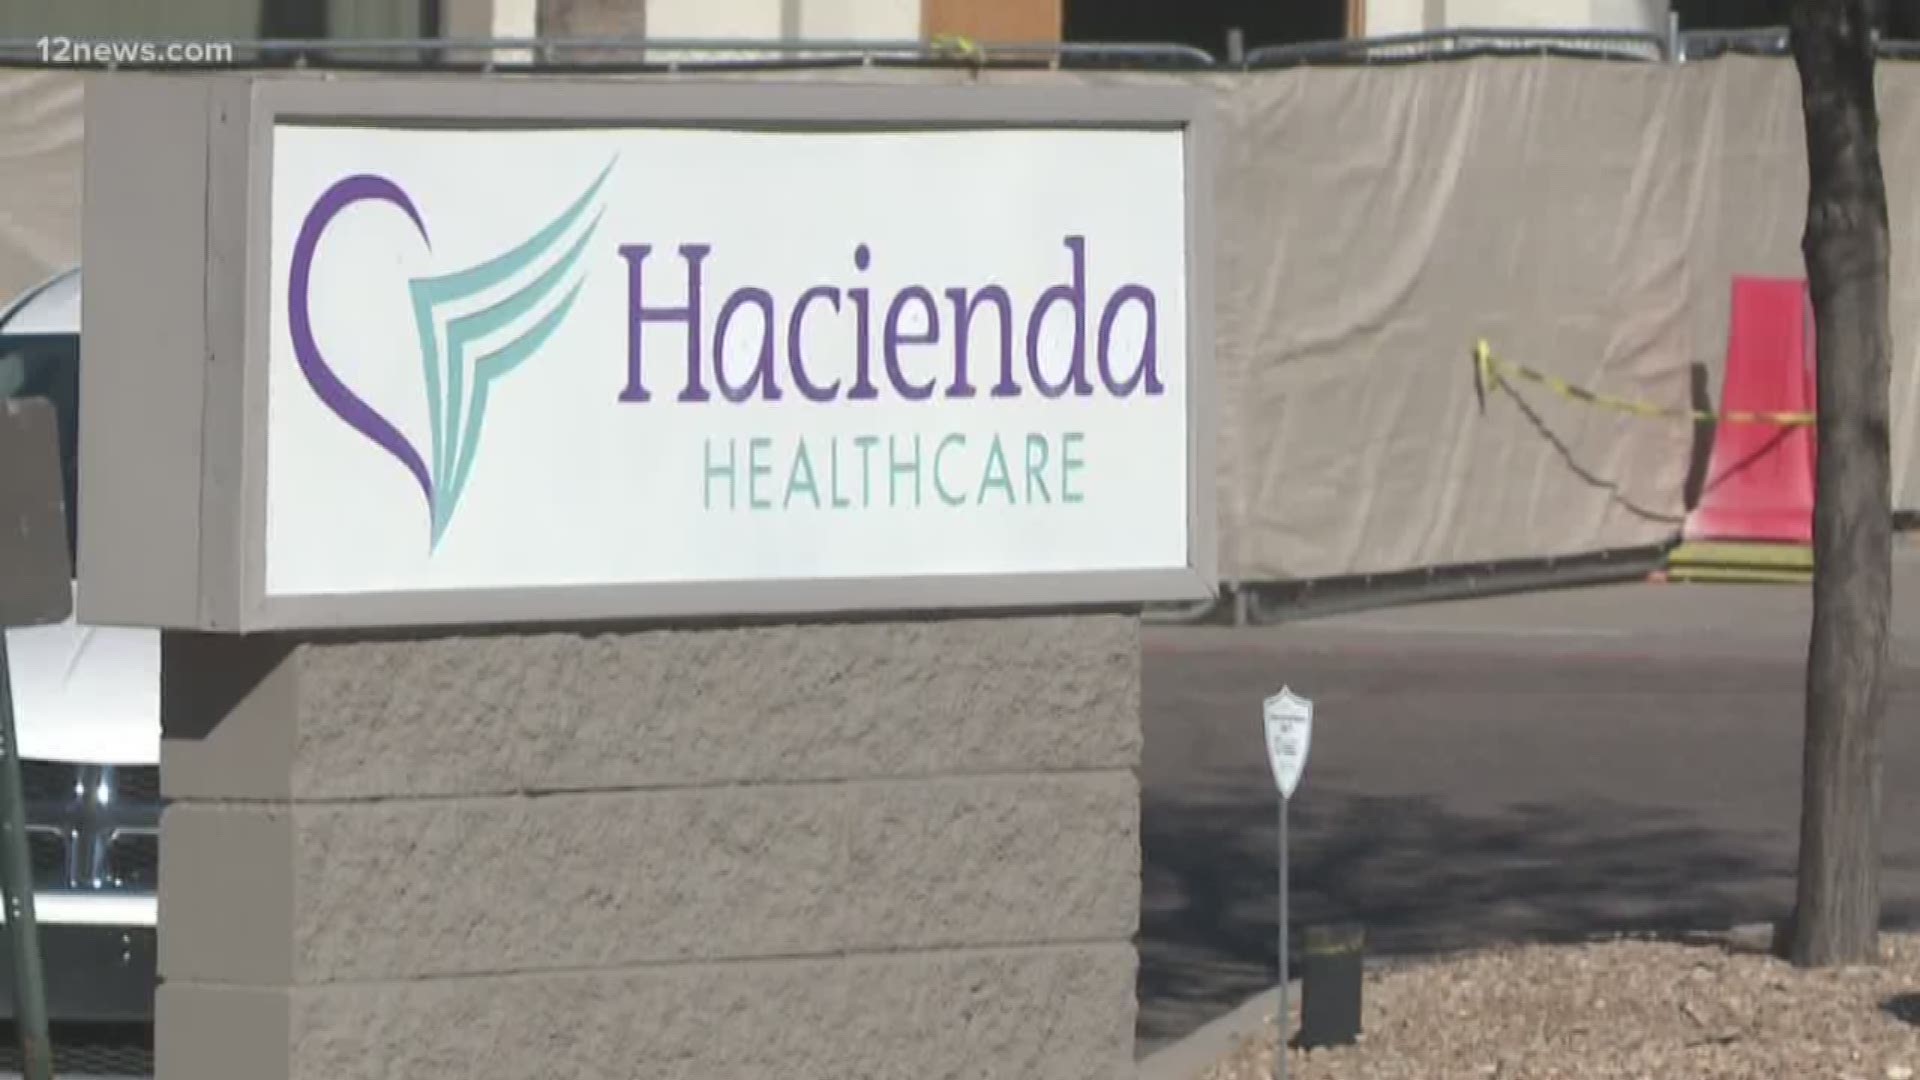 Six weeks ago tomorrow a baby boy was born to an incapacitated patient at Hacienda Healthcare. It is also almost six weeks and counting without any formal agreement on how to prevent another vulnerable patient from being raped. Tonight, there might be a breakthrough.